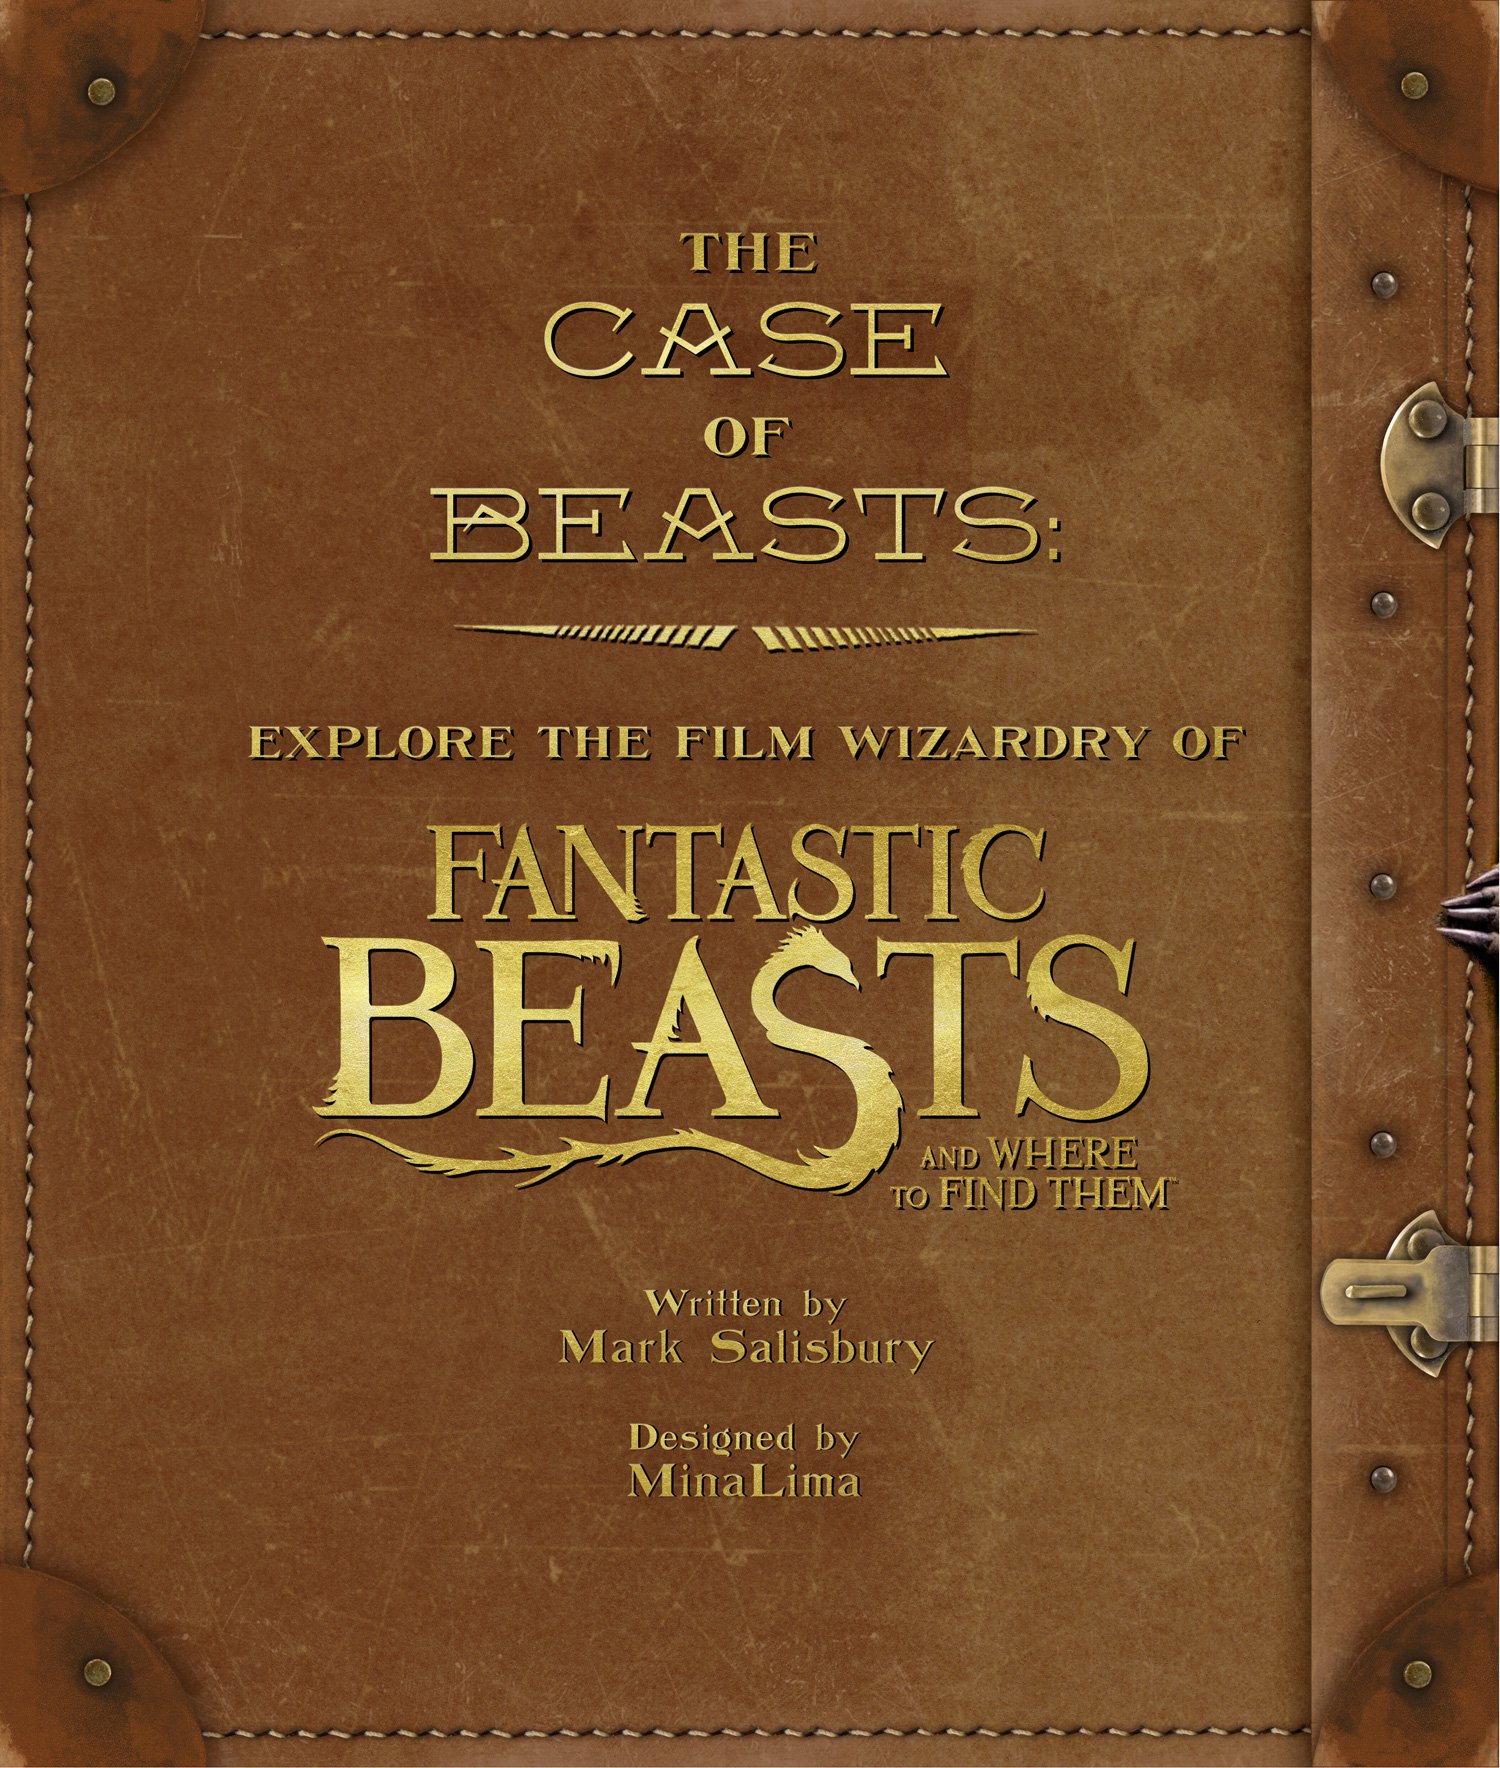 New Fantastic Beasts And Where to Find Them Book Review 